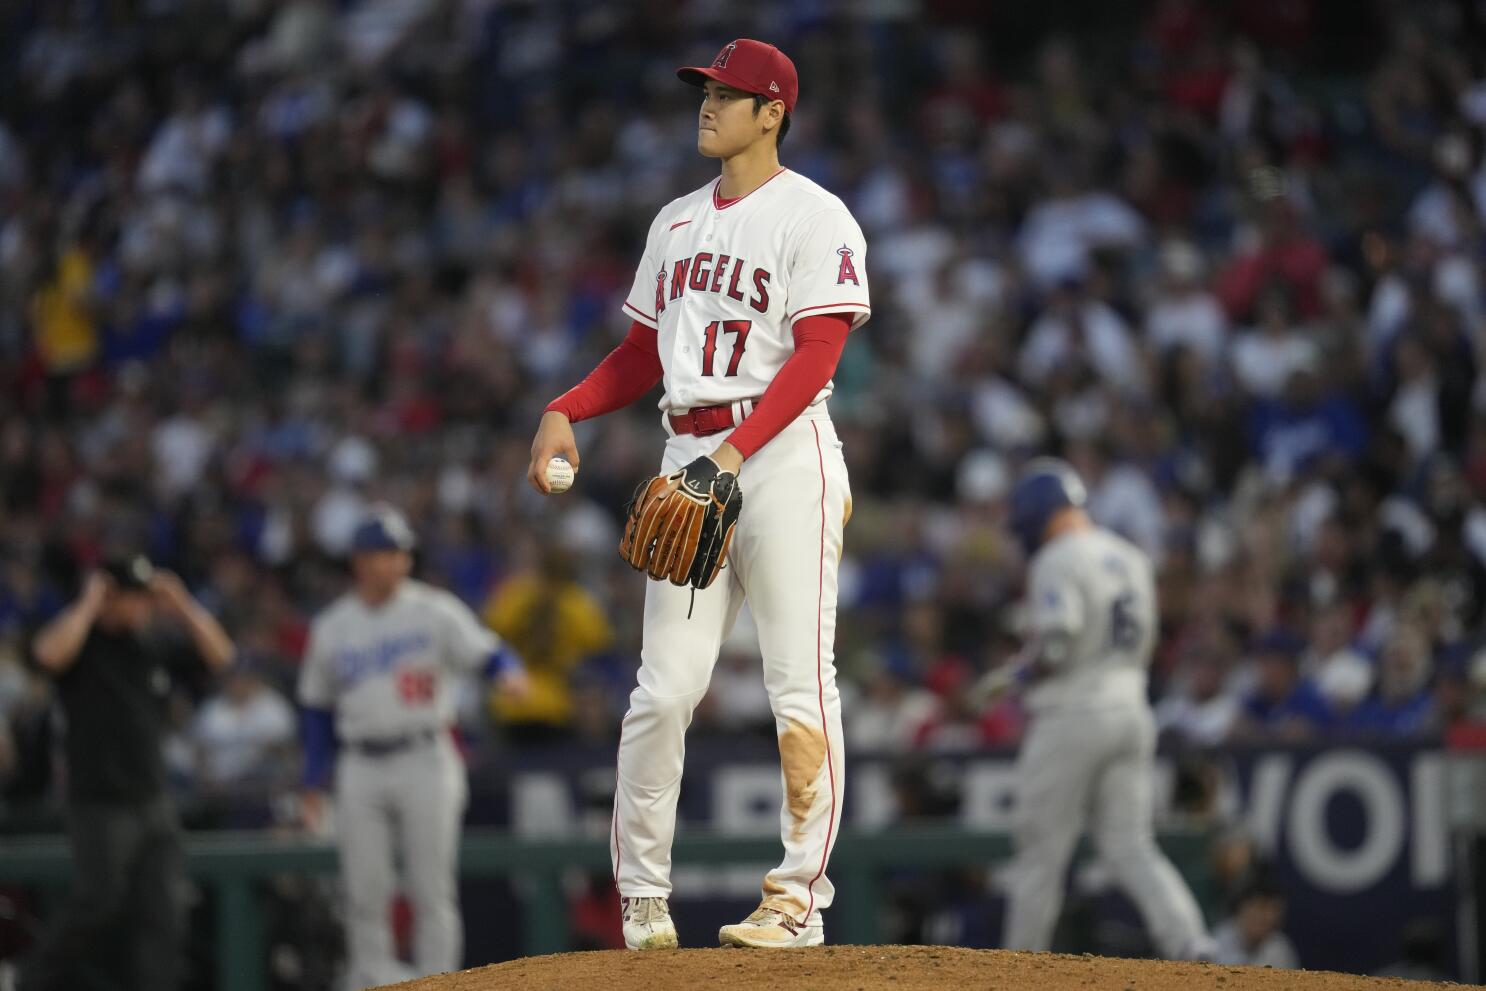 Japanese baseball star Shohei Ohtani could be double threat in big leagues  - Los Angeles Times